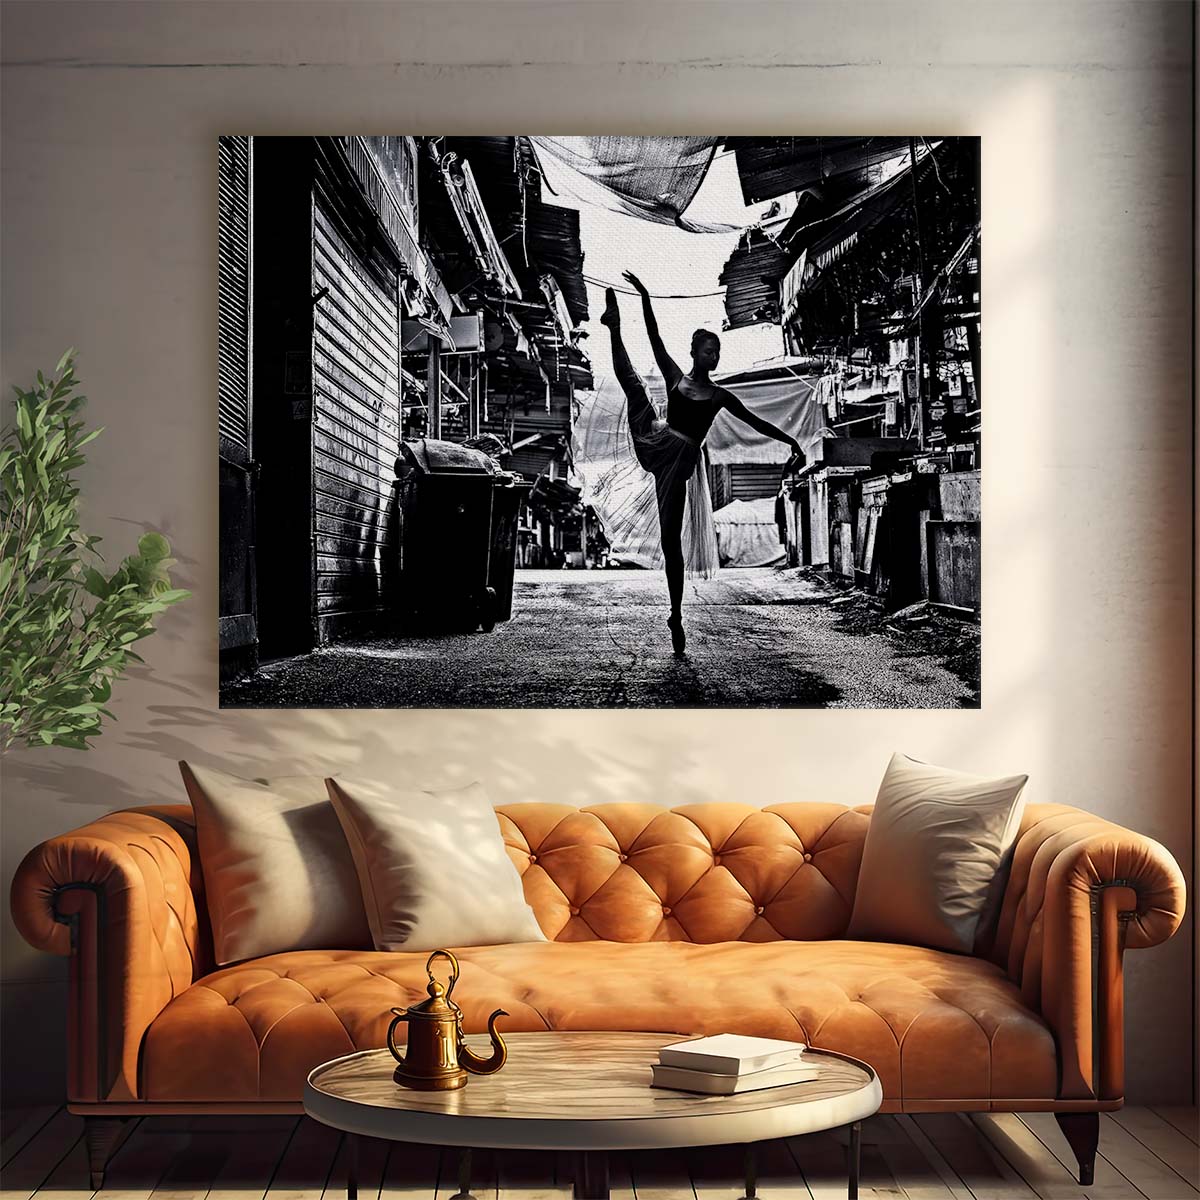 Graceful Ballerina Dancing in Monochrome Alley Wall Art by Luxuriance Designs. Made in USA.